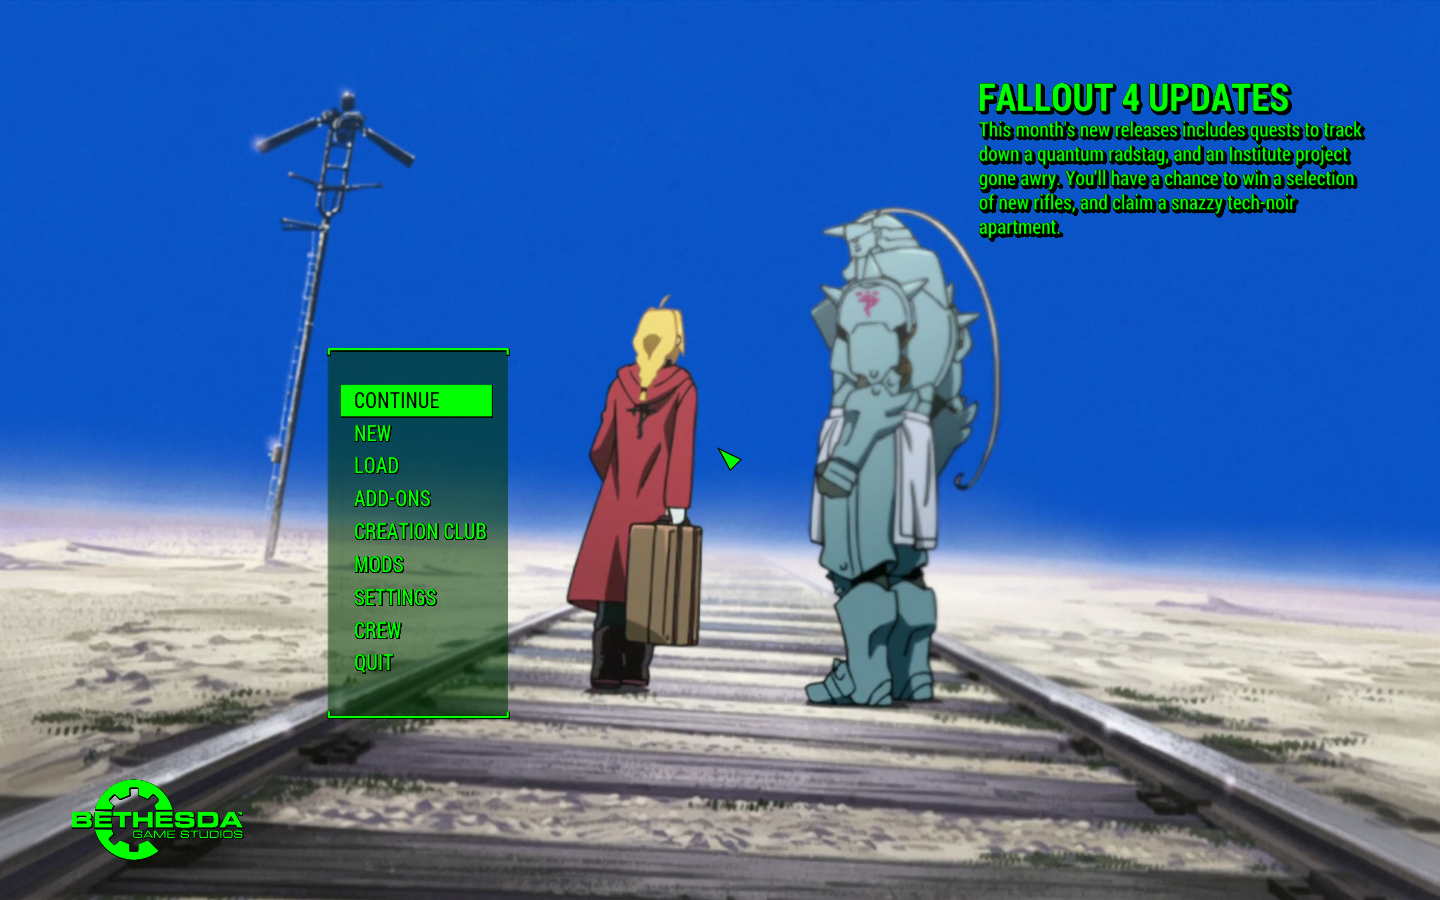 Fallout 4 Main Menu FMAB Opening 2 Replacer by franticdreamer on DeviantArt